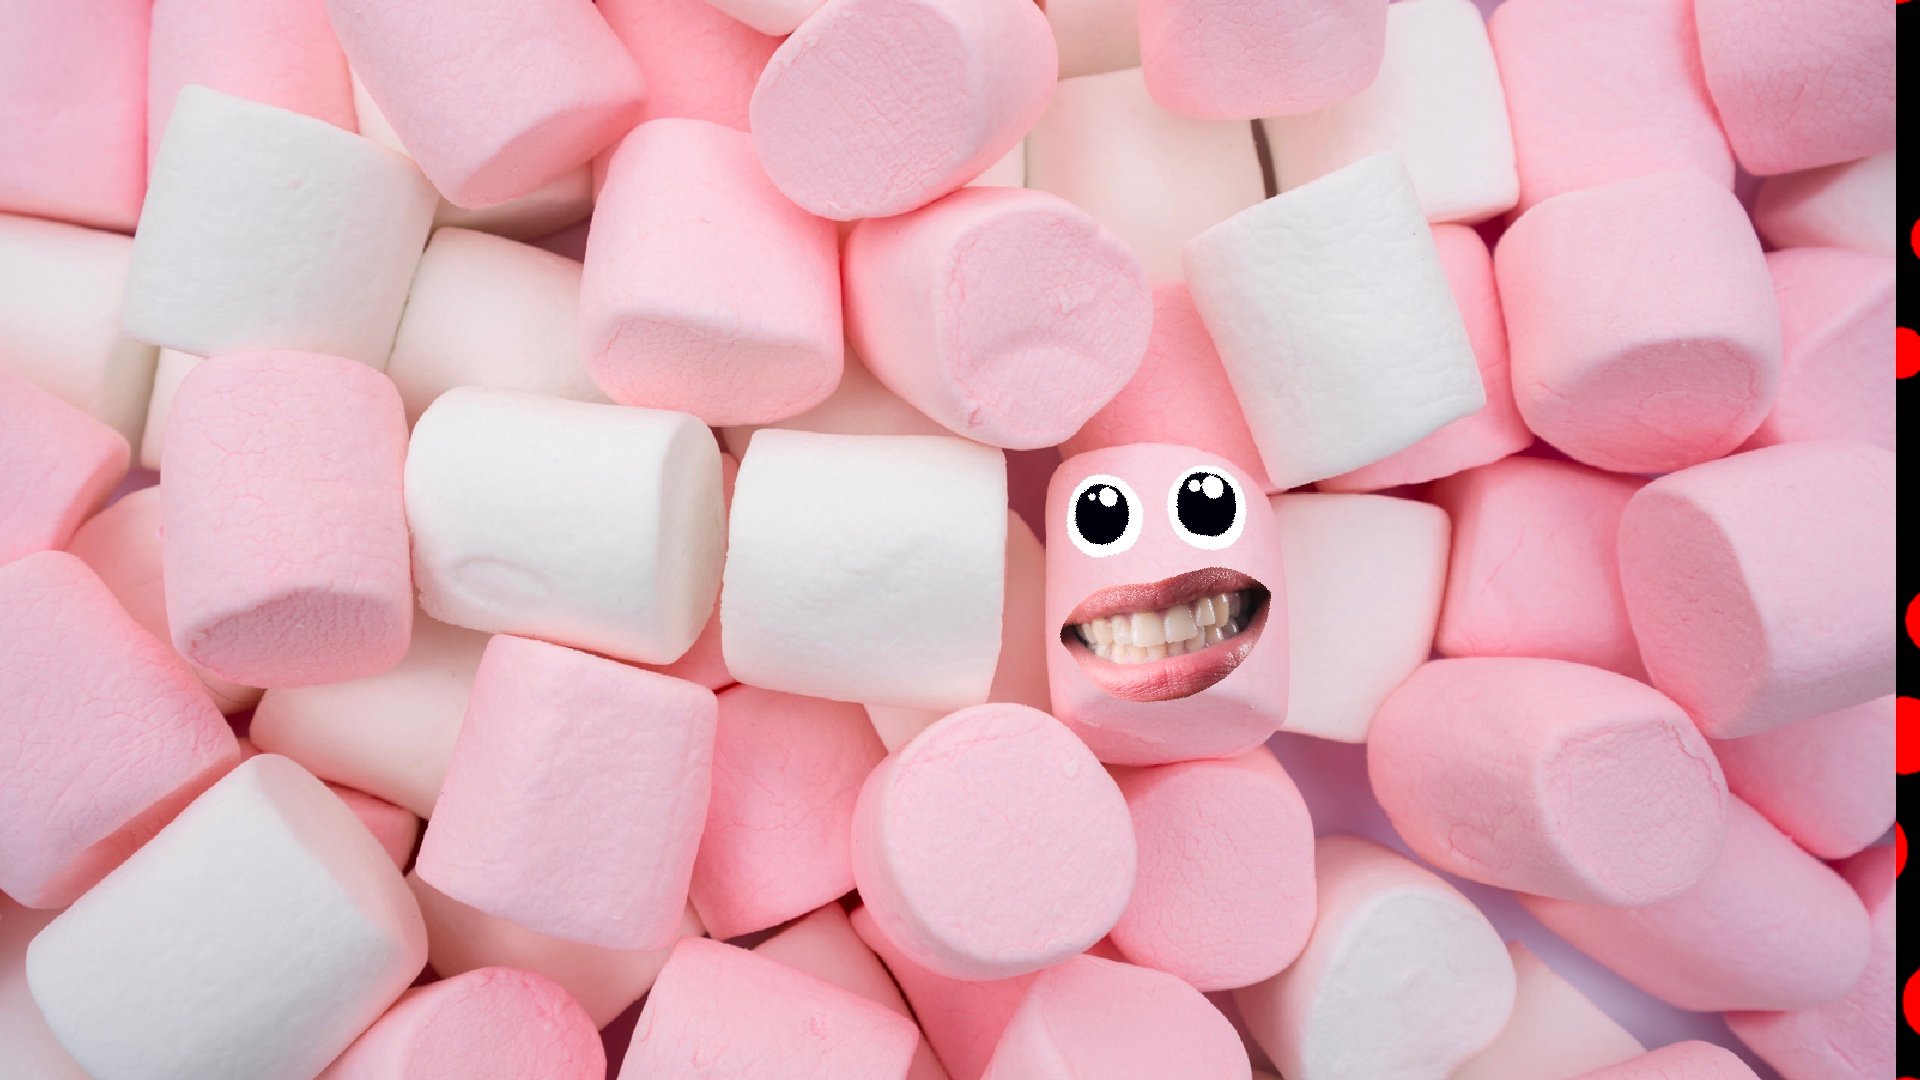 Some white and pink marshmallows